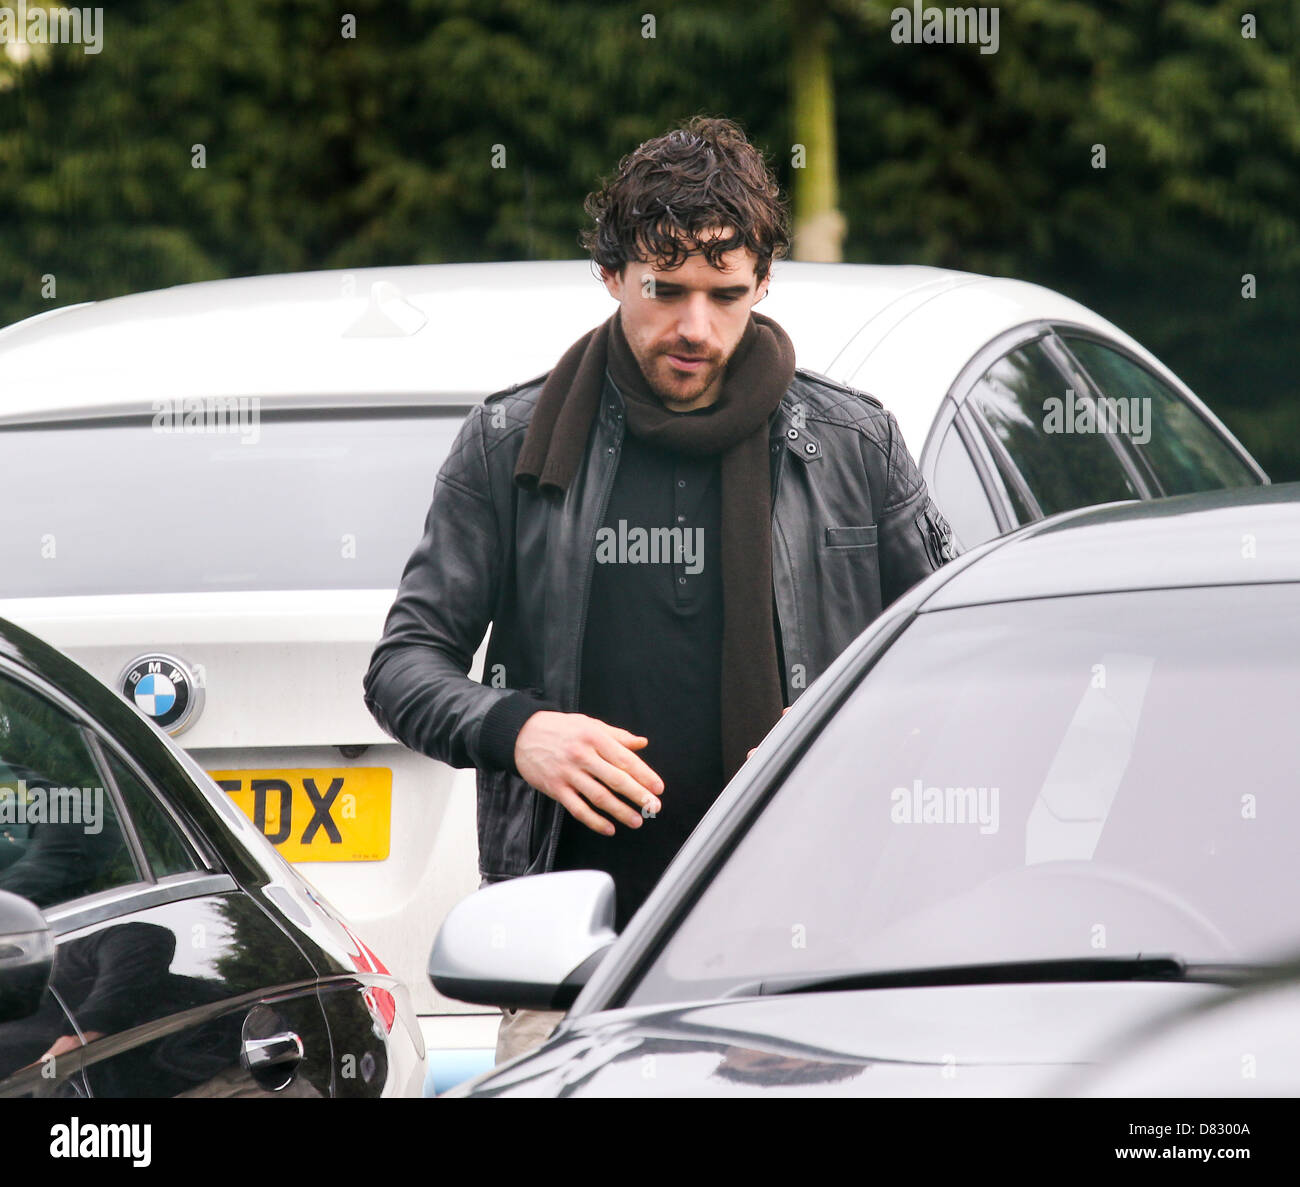 Owen Hargreaves Manchester City F.C at their training ground in Manchester Manchester, England - 14.02.12 Stock Photo